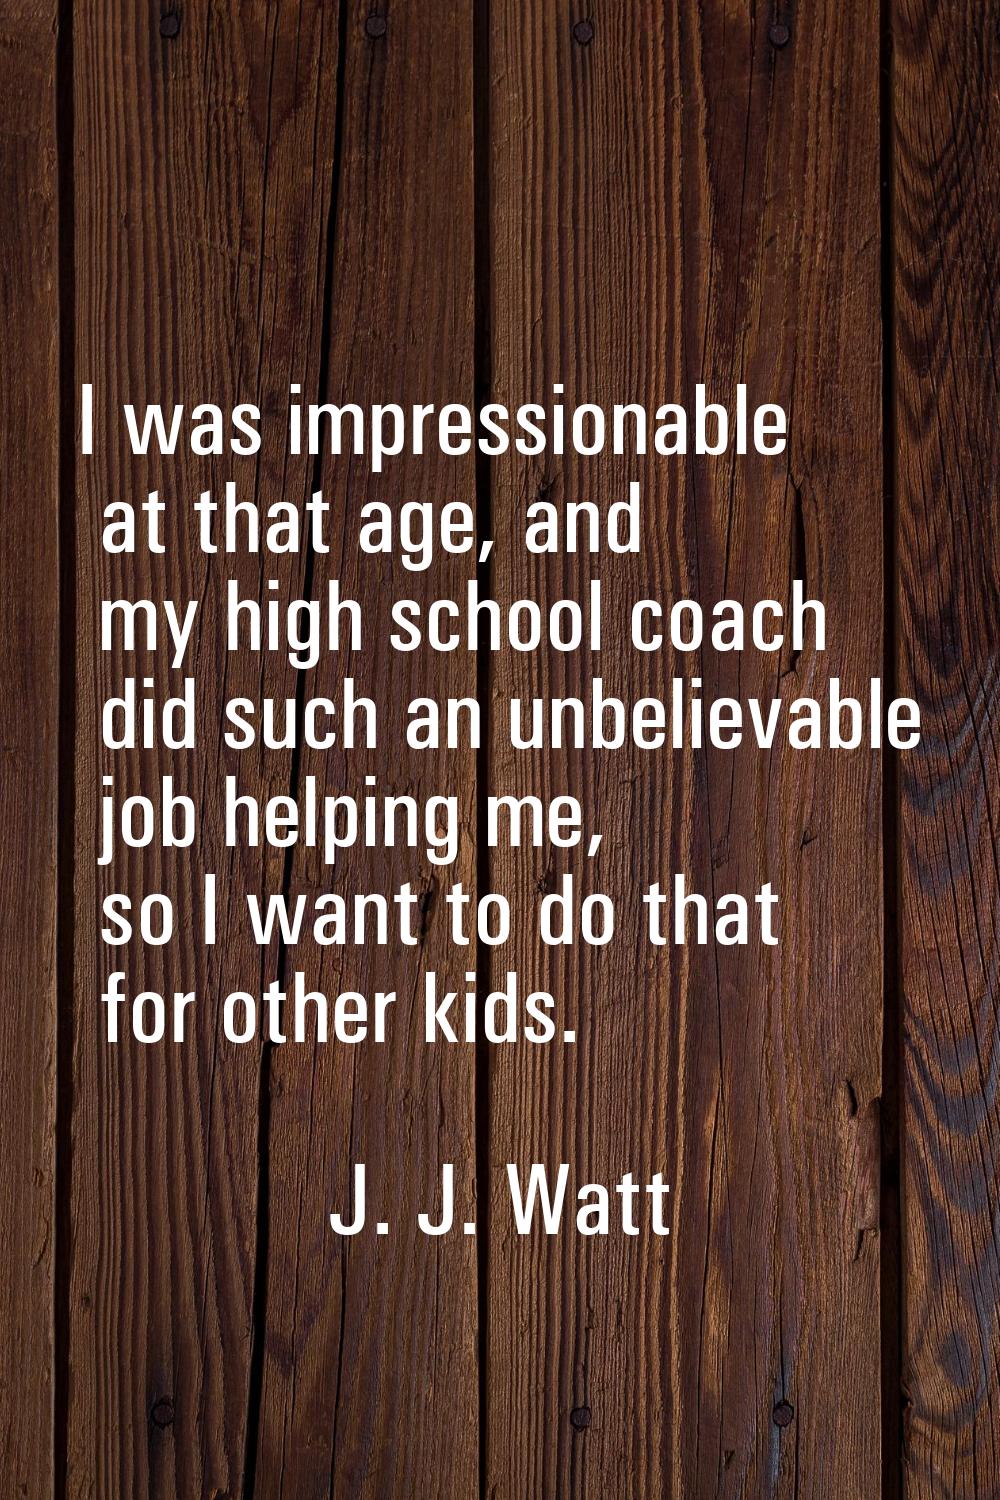 I was impressionable at that age, and my high school coach did such an unbelievable job helping me,